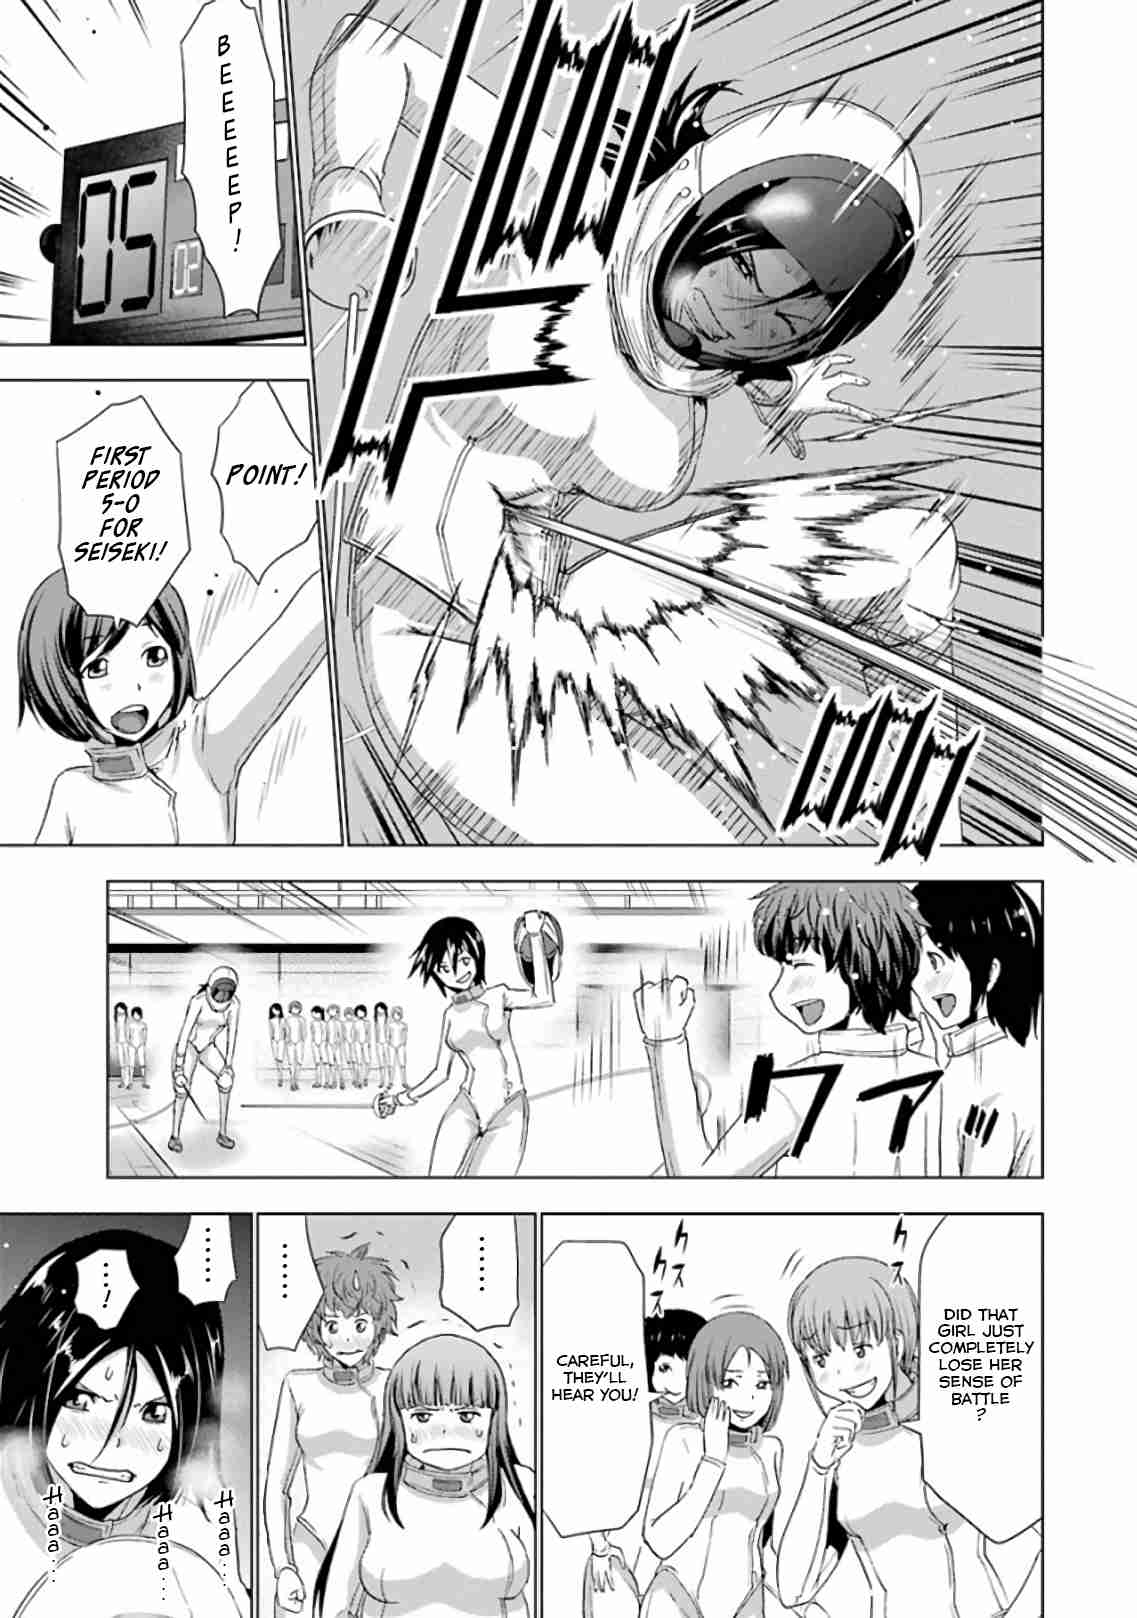 Duel! Vol. 2 Ch. 8 Really lame